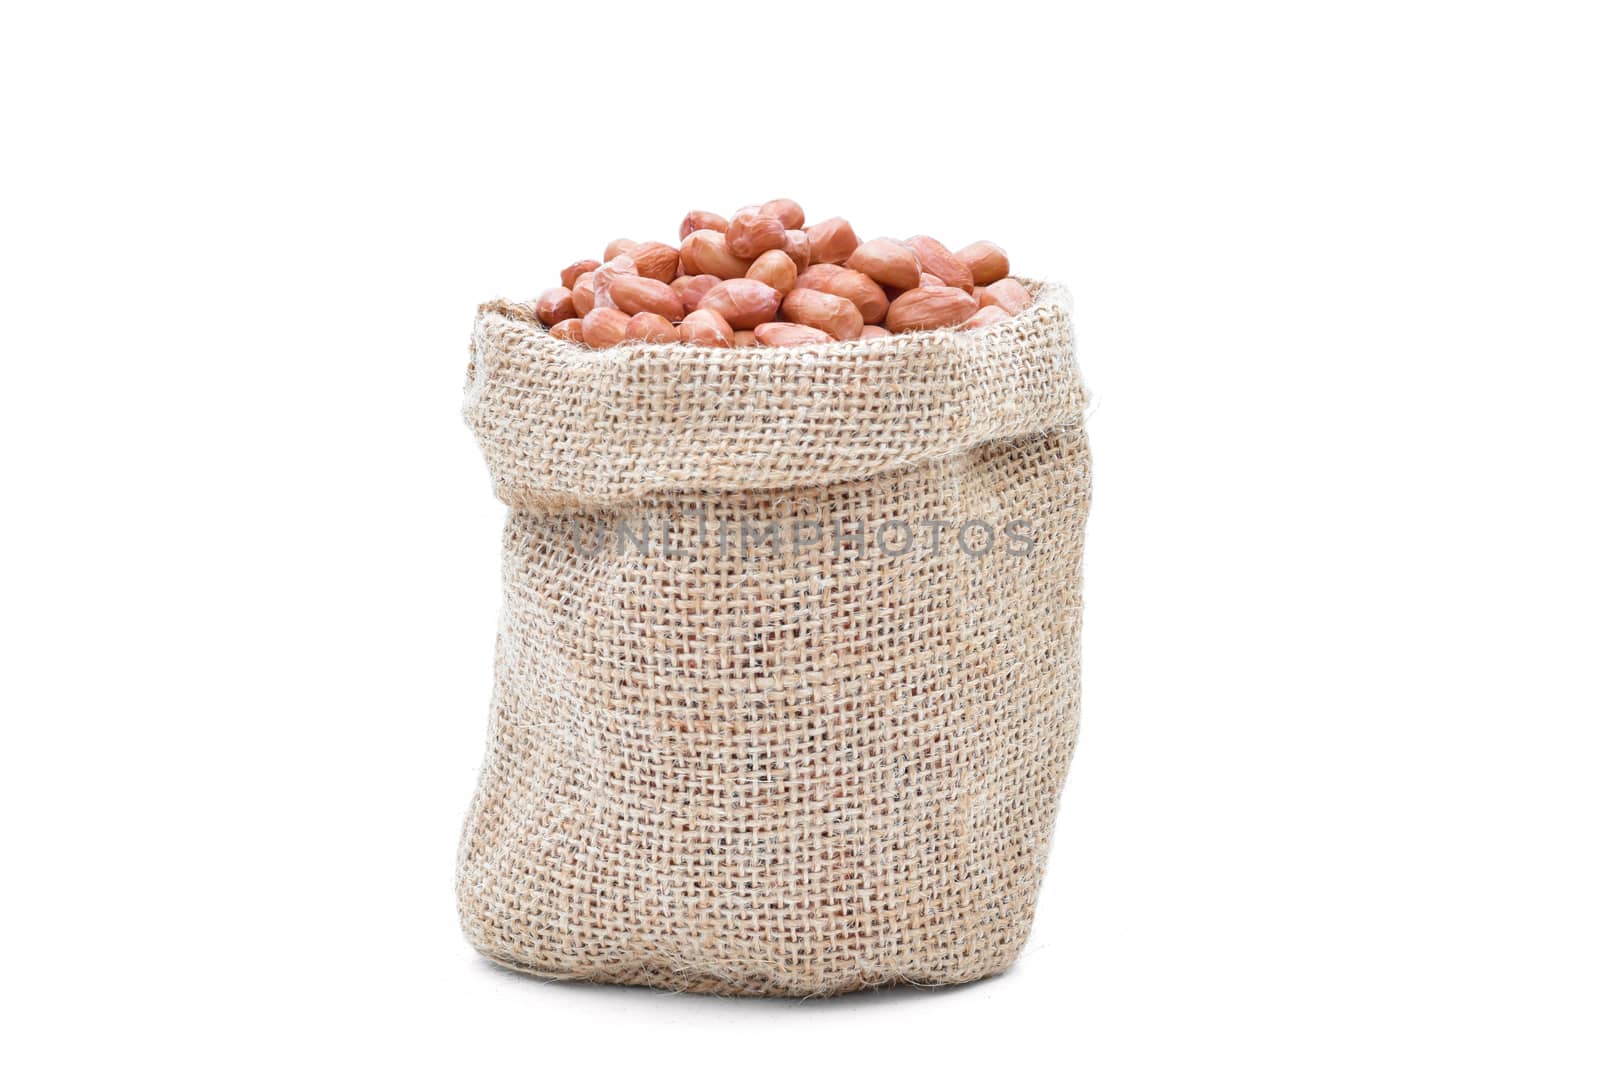 Peanuts raw grains in a sack of on white background